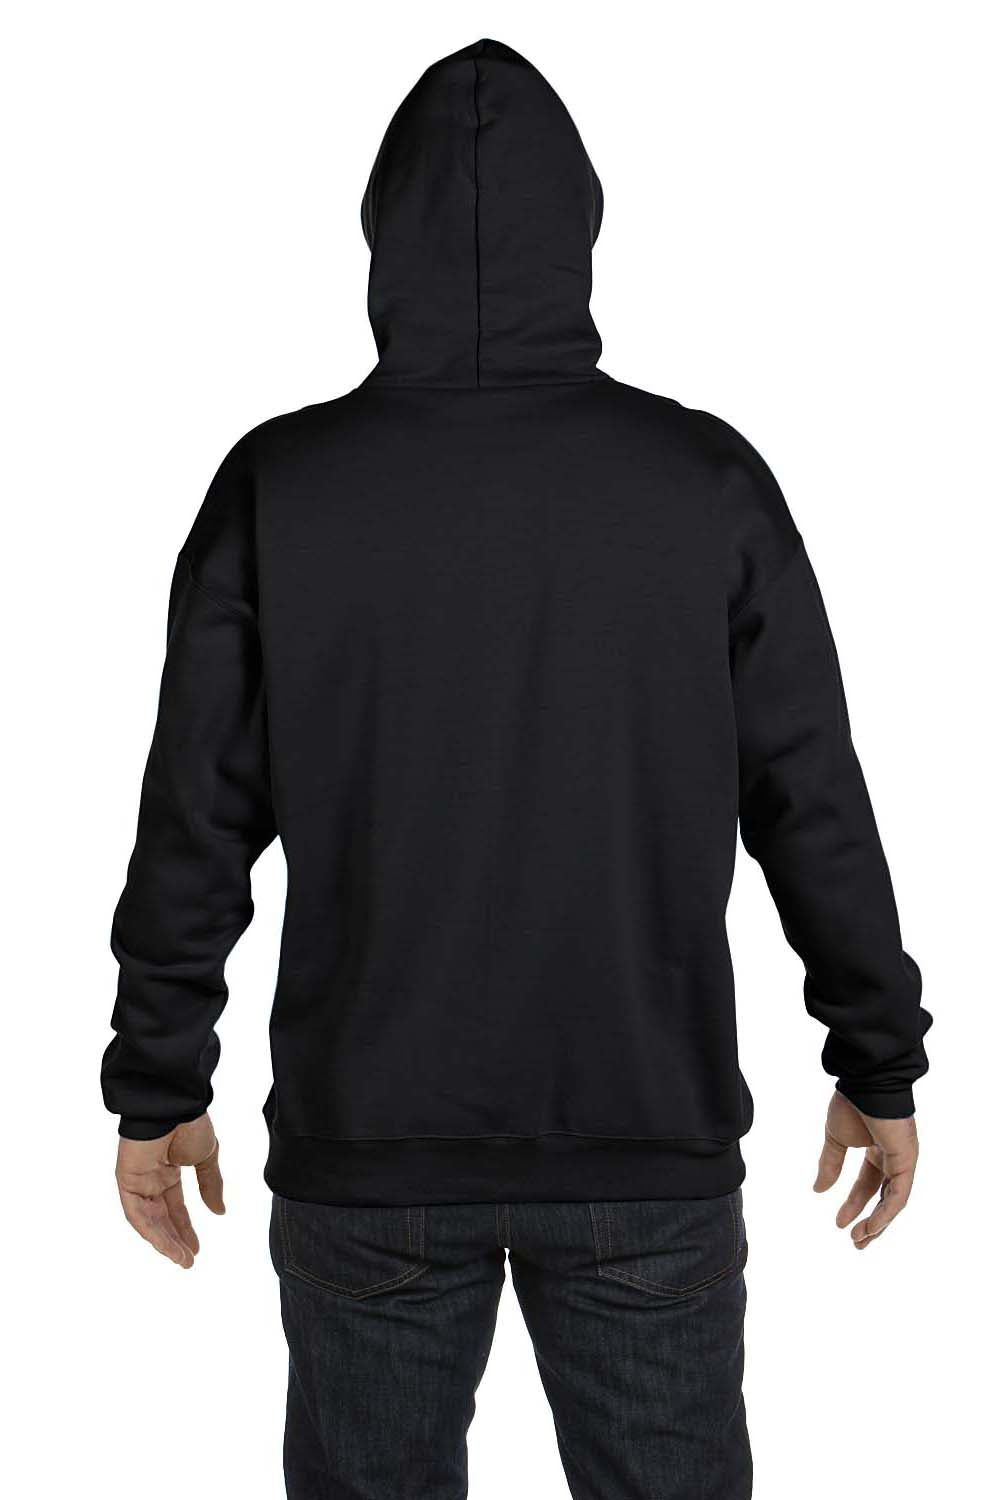 Hanes F170 Ultimate Cotton Pullover Hoodie 